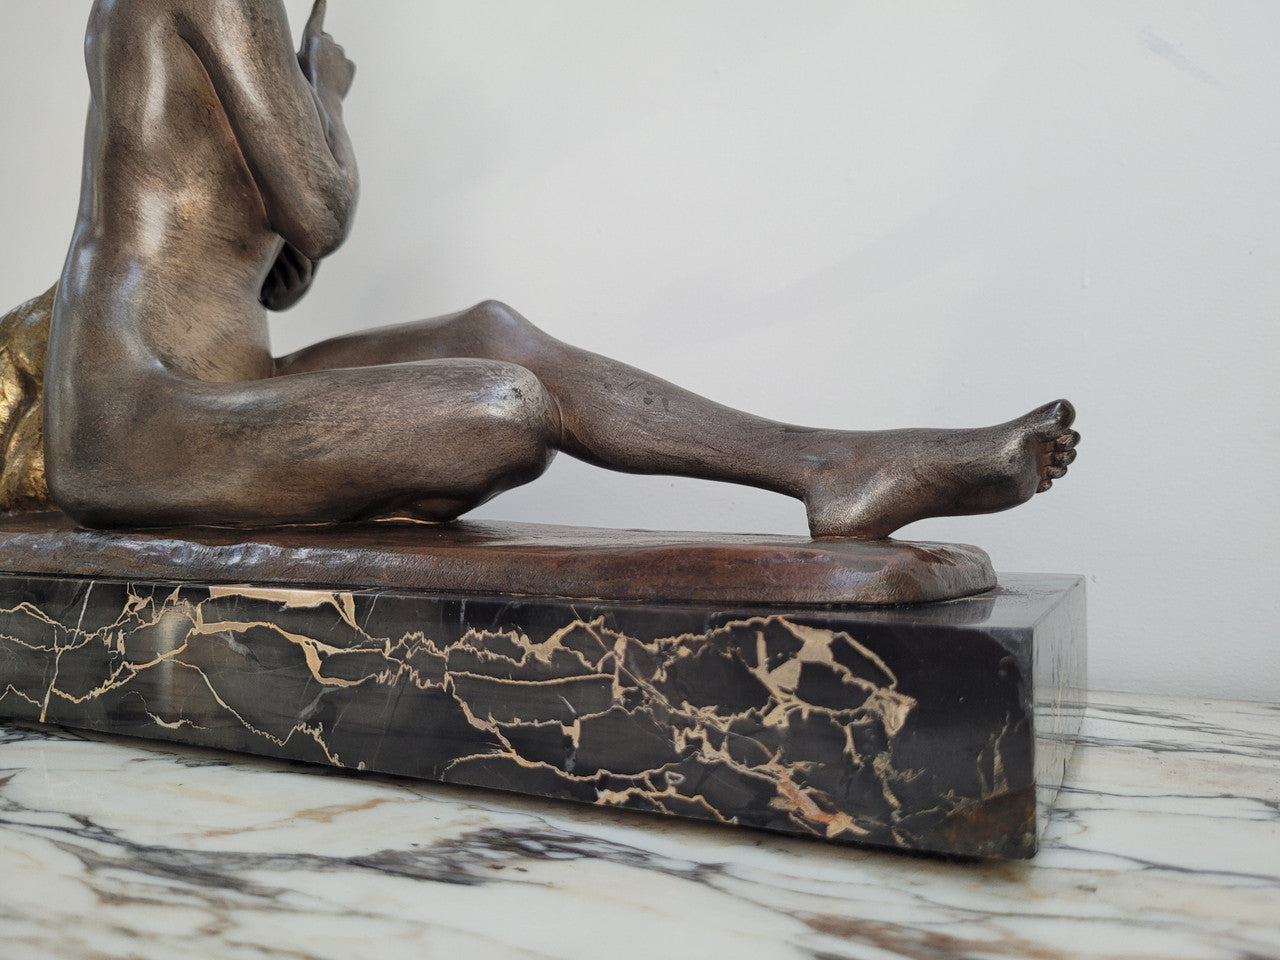 French Art Deco bronze figure on marble base circa 1925. Signed by Louis Riche (1877-1949) who specialized in sculpting animals in bronze with German Shepard being his specialty and considered a master at reproducing them. His first exhibit was at the age of 19.